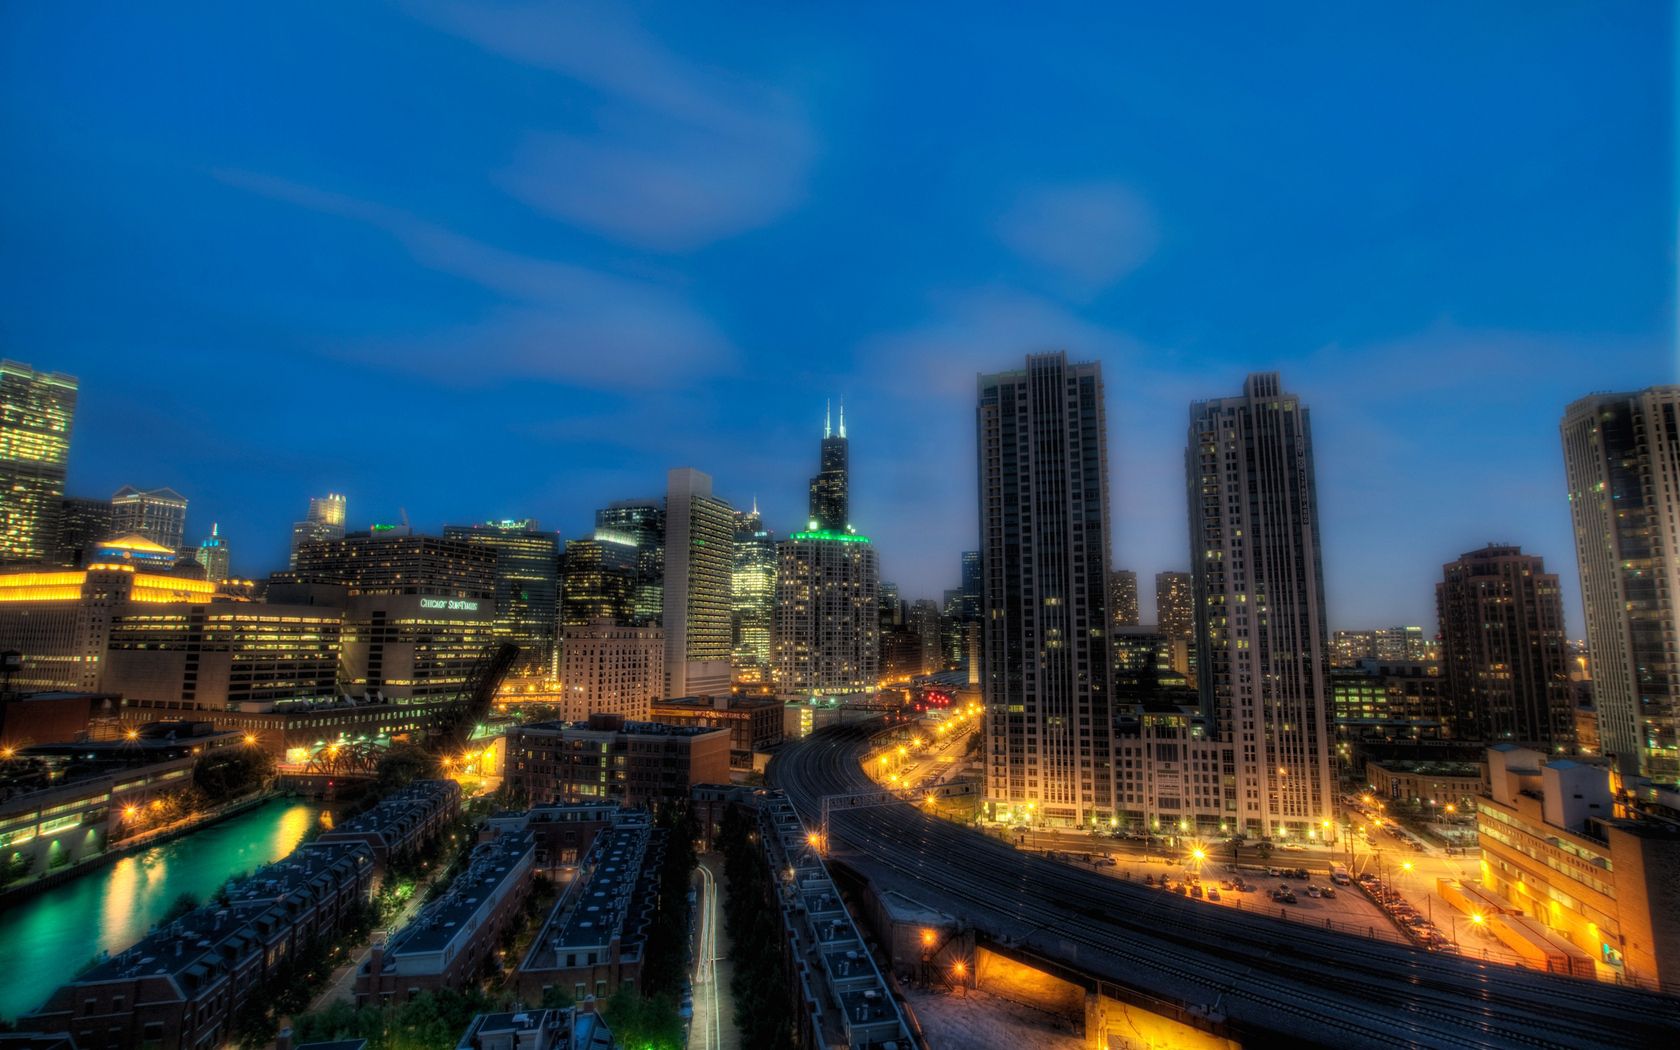 Wallpaper Full HD cities, night, city lights, skyscrapers, hdr, chicago, illinois